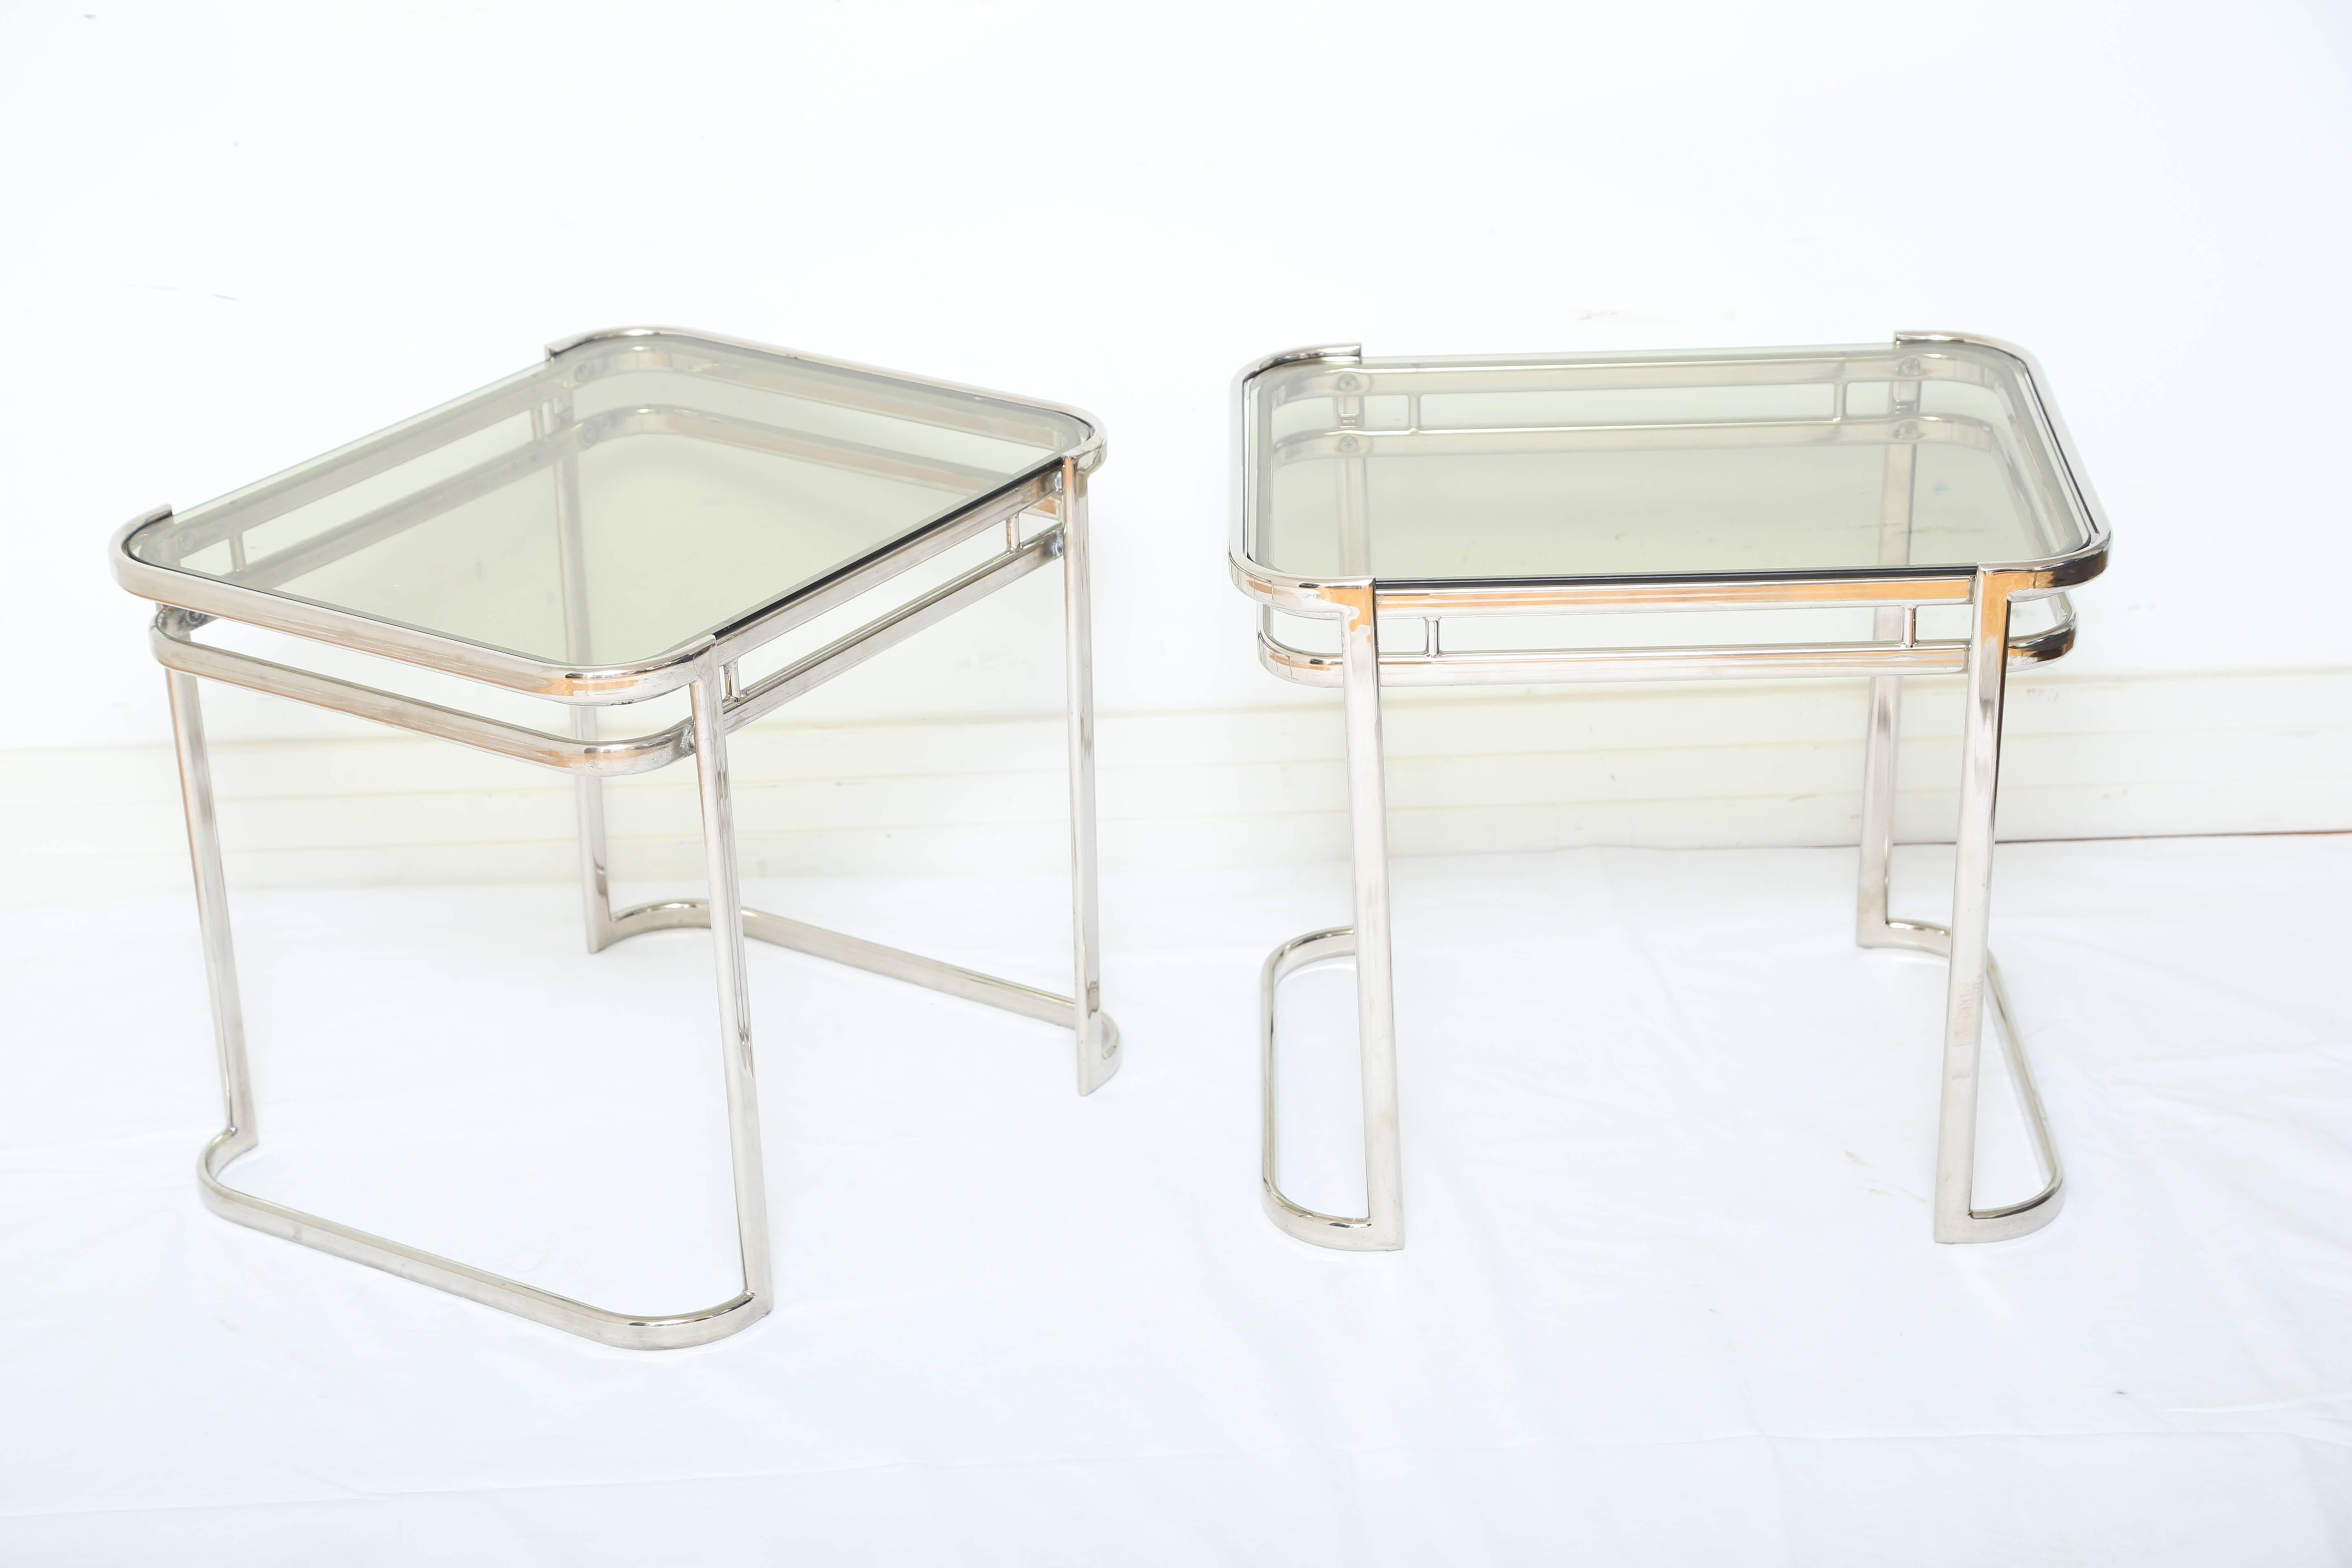 Pair of sleek midcentury side tables with streamline design. The tables feature curved corners with double banded frames and curved legs or bases. The tables have a small rectangular form and be used horizontally or vertically. Fitted with smoked